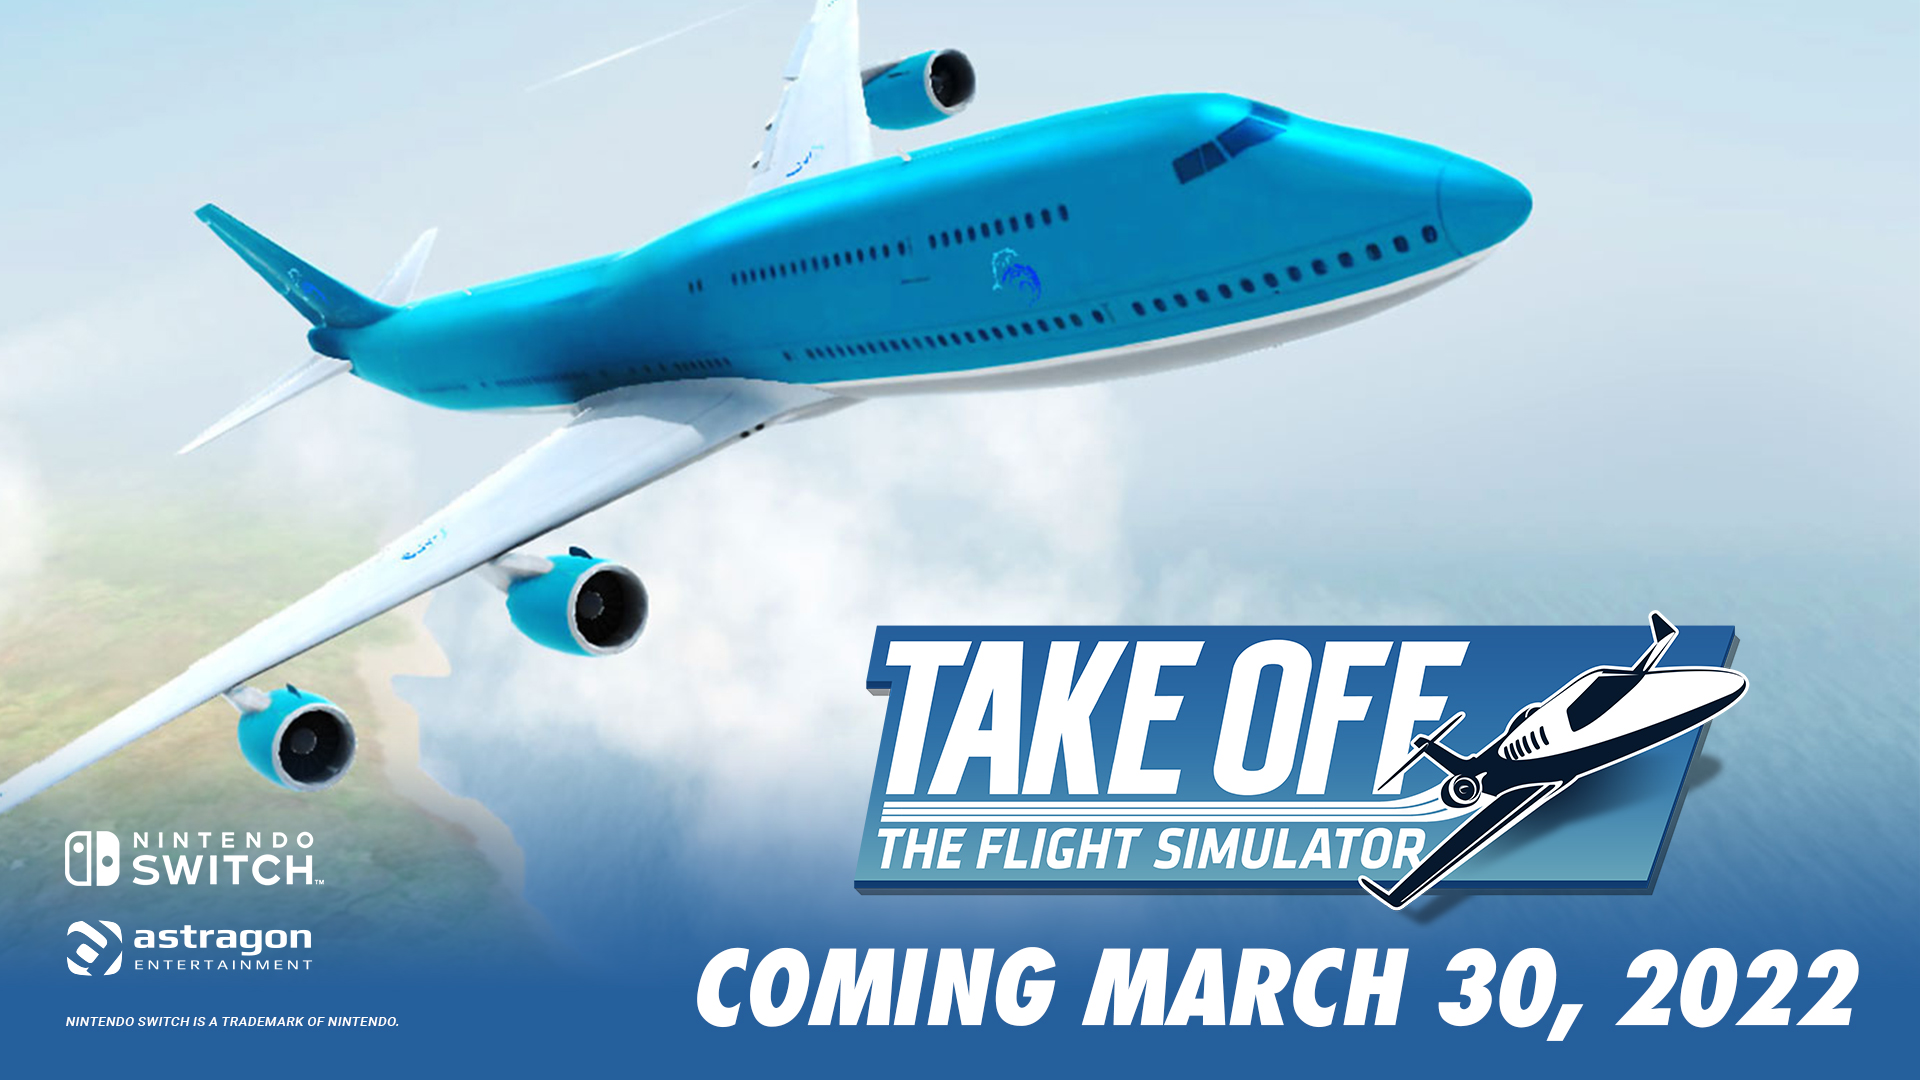 Take Off - The Flight Simulator will be available for Nintendo Switch™ soon